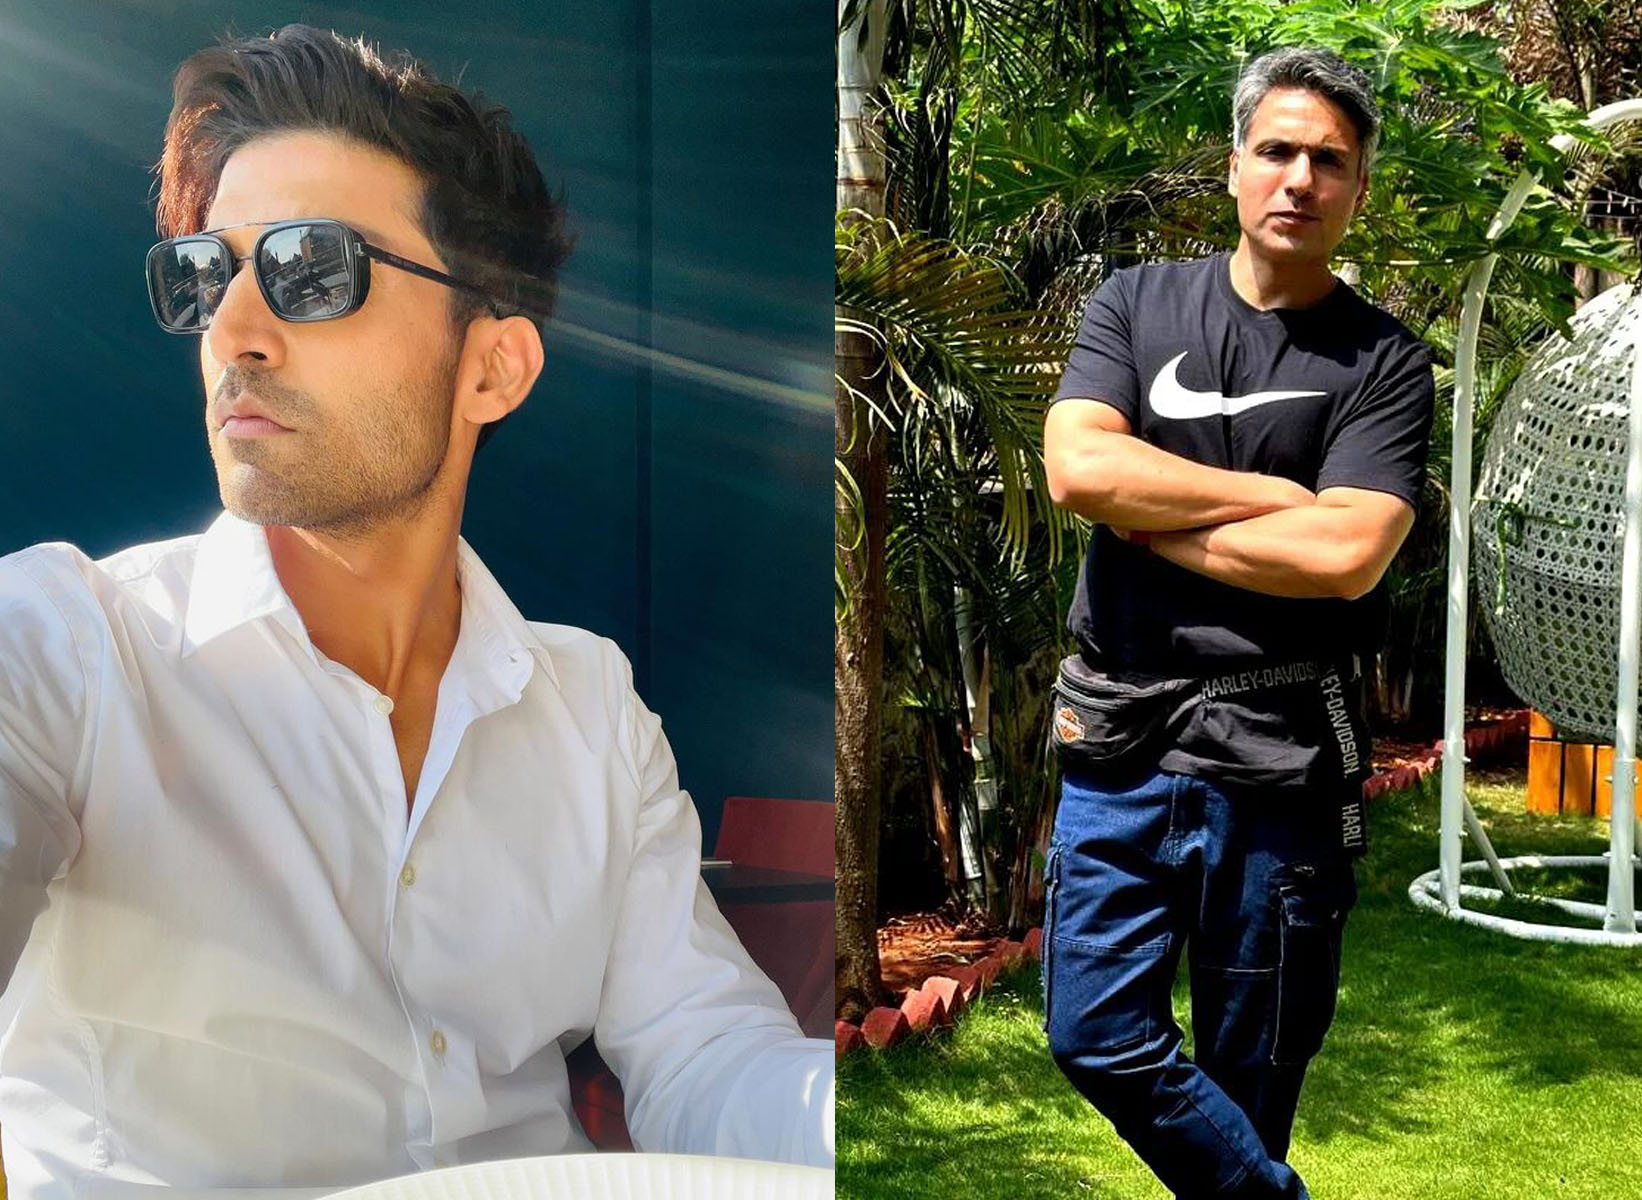 Gurmeet Choudhary And Iqbal Khan Will Feature In Upcoming New Web Series! Do We Expect Powerful Roles? Check Out About This Exclusive Update!